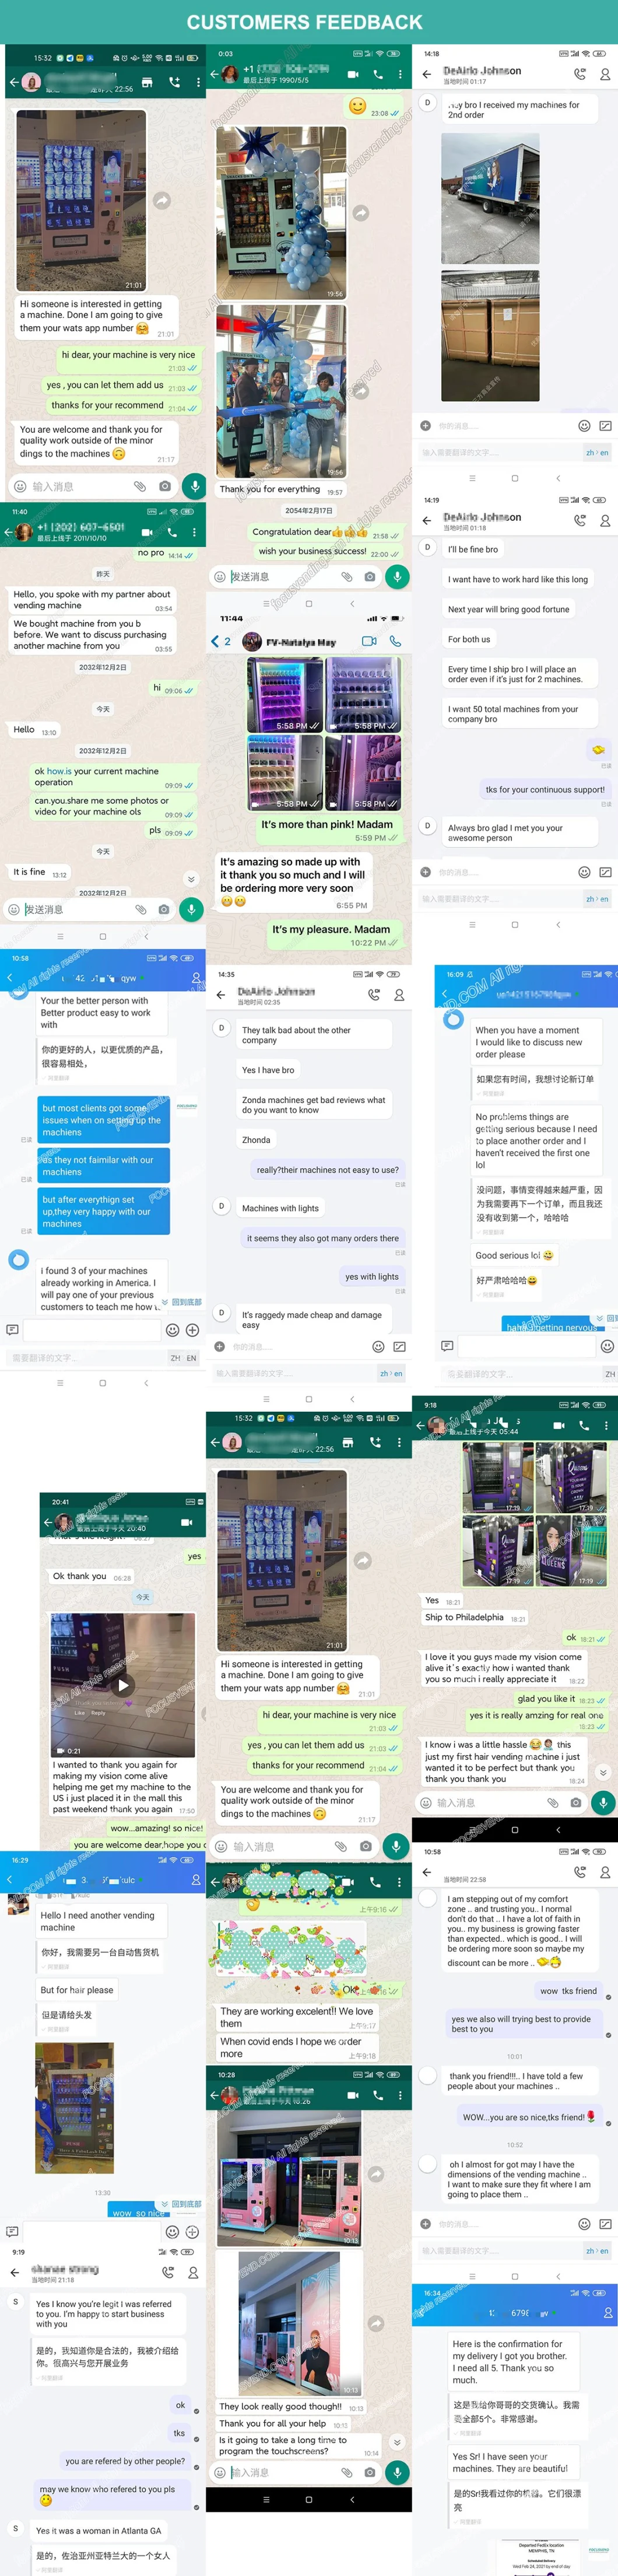 Fully Automatic Vending Machine for Foods and Drinks Combo Selling Wine and Fresh Fruits with Elevator Supports Google Pay /Banknote and Coins